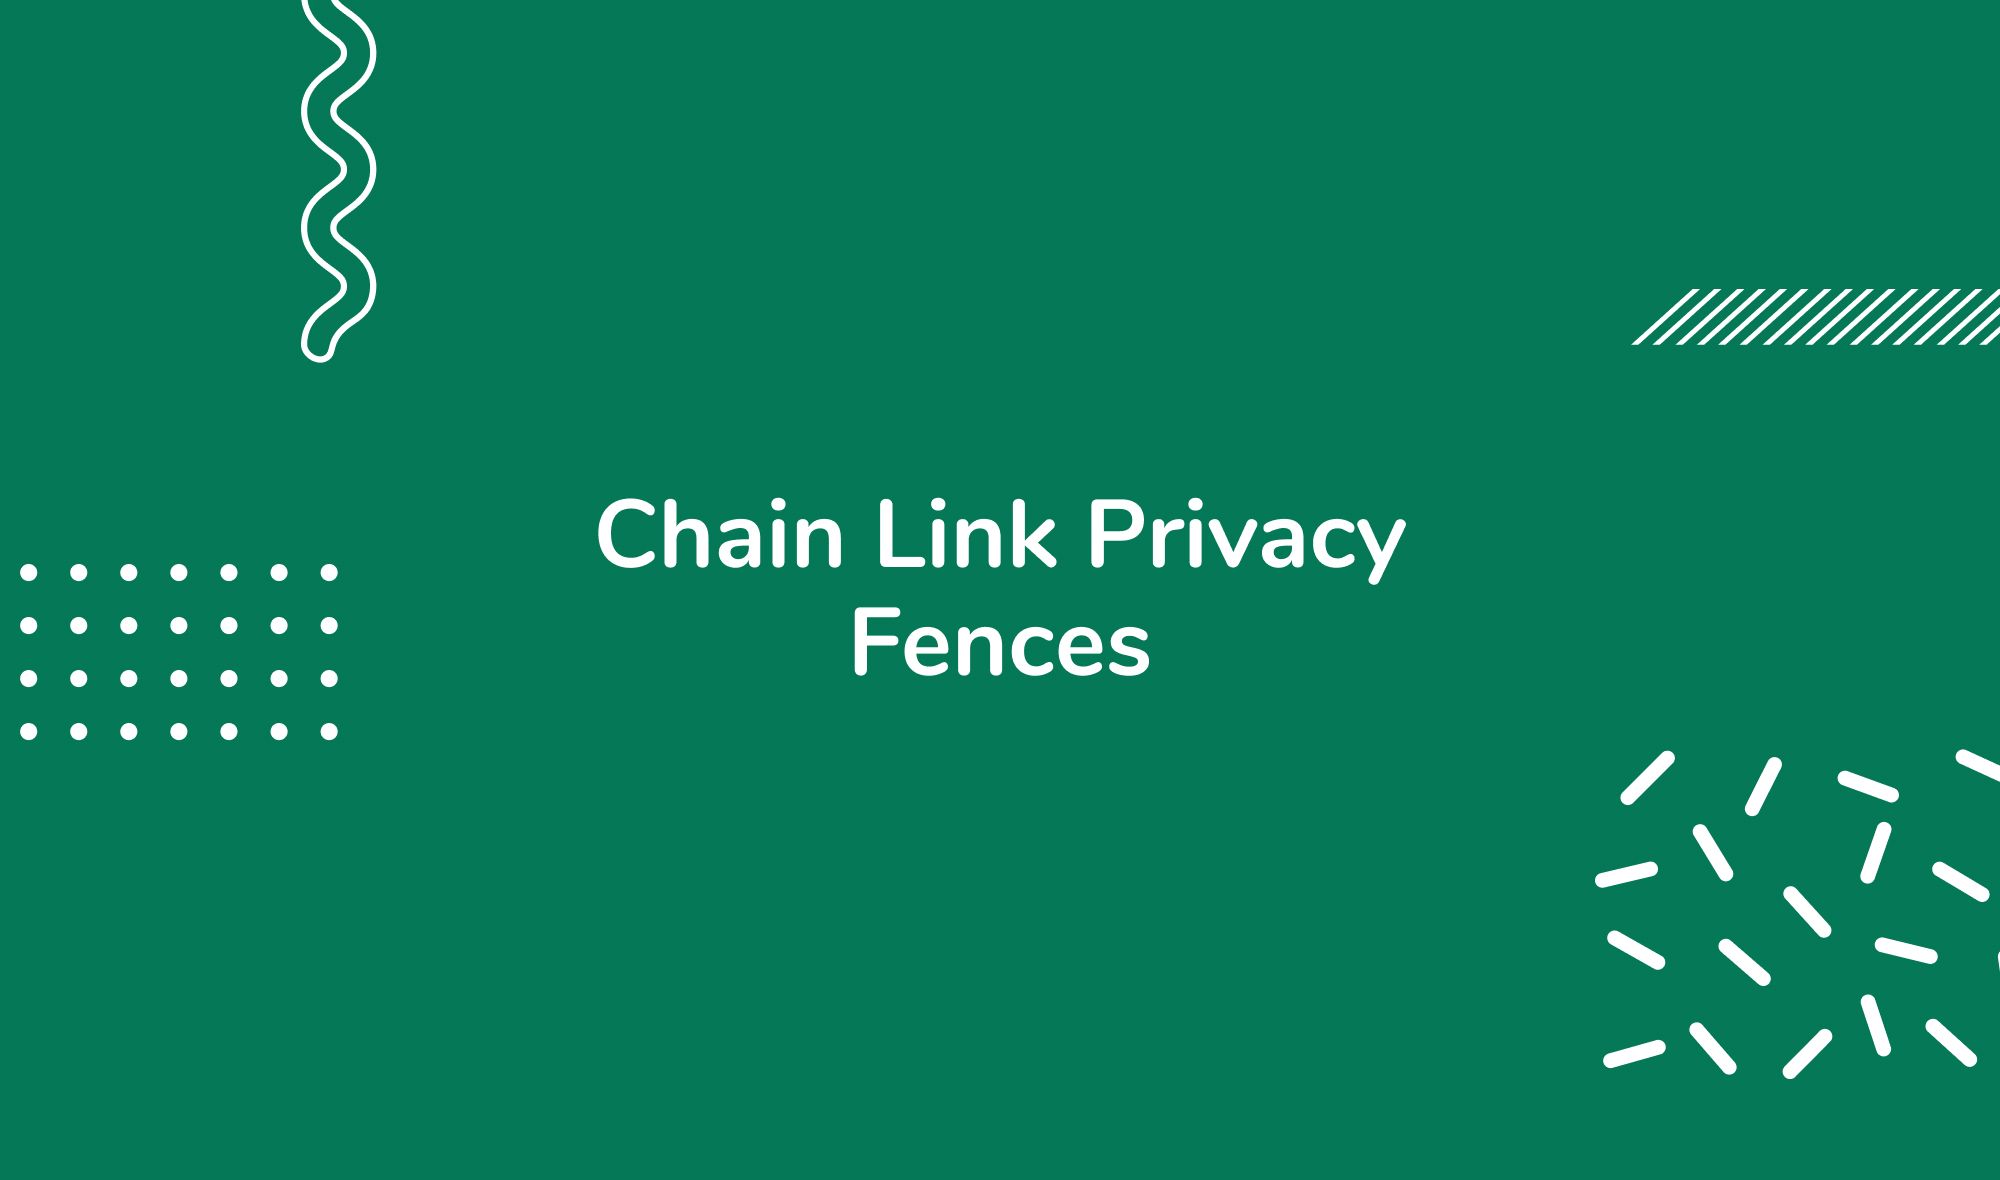 Chain Link Privacy Fences